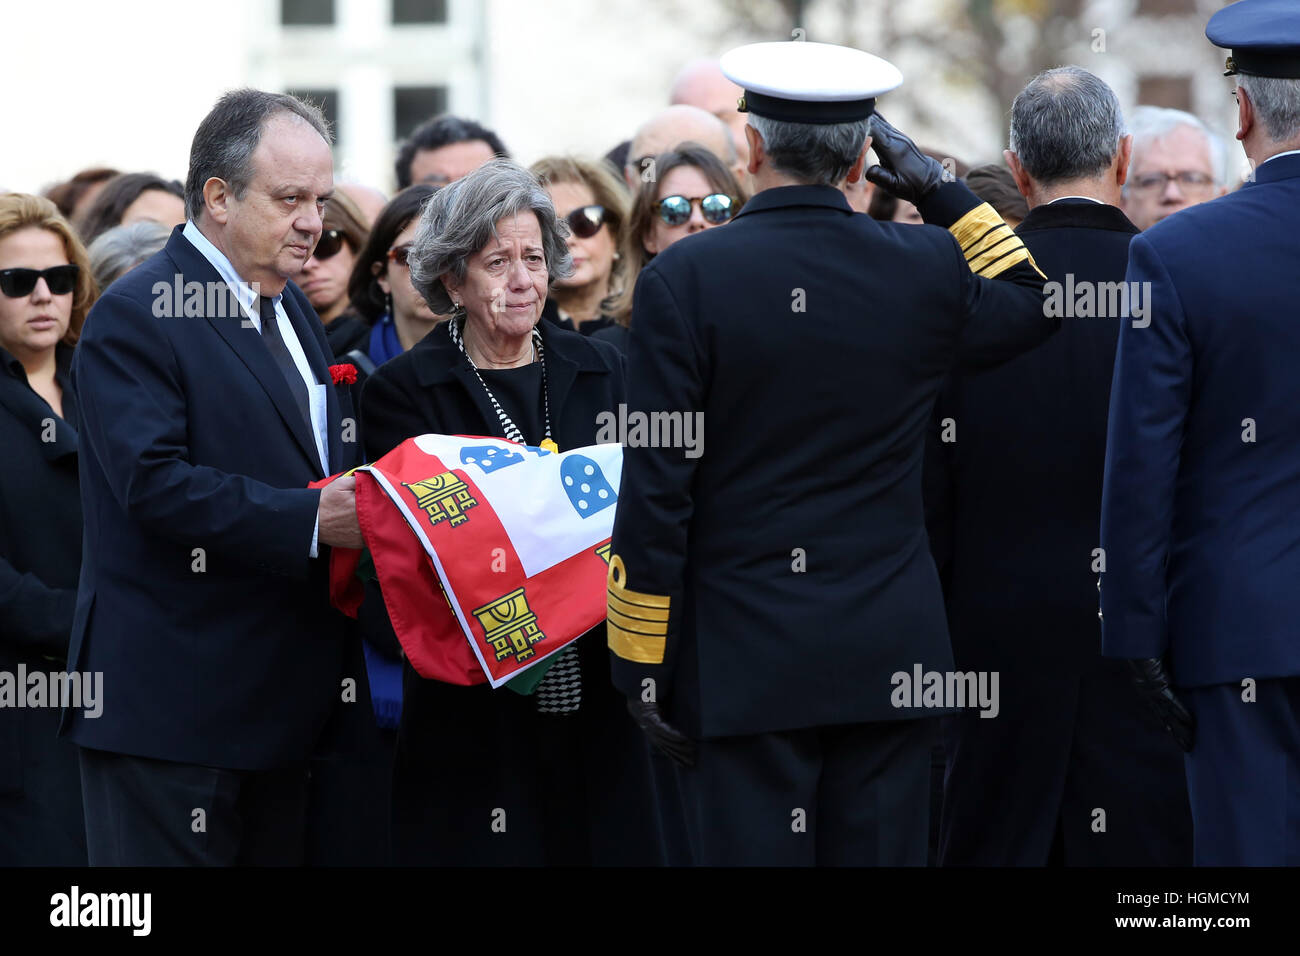 Lisbon, Portugal. 10th Jan, 2017. Portugal's President Marcelo Rebelo de Sousa (unseen) delivers the Portugal's coffin flag to the son Jo''¹o Soares (L ) and daughter Isabel Soares (C ) during the Funeral Ceremony of the late former Portuguese President Mario Soares at the Prazeres cemetery in Lisbon, on January 10, 2017. The founder of Portugal's Socialist Party, who served as president from 1986-96, died in hospital on January 7, 2017. Credit: ZUMA Press, Inc./Alamy Live News Stock Photo